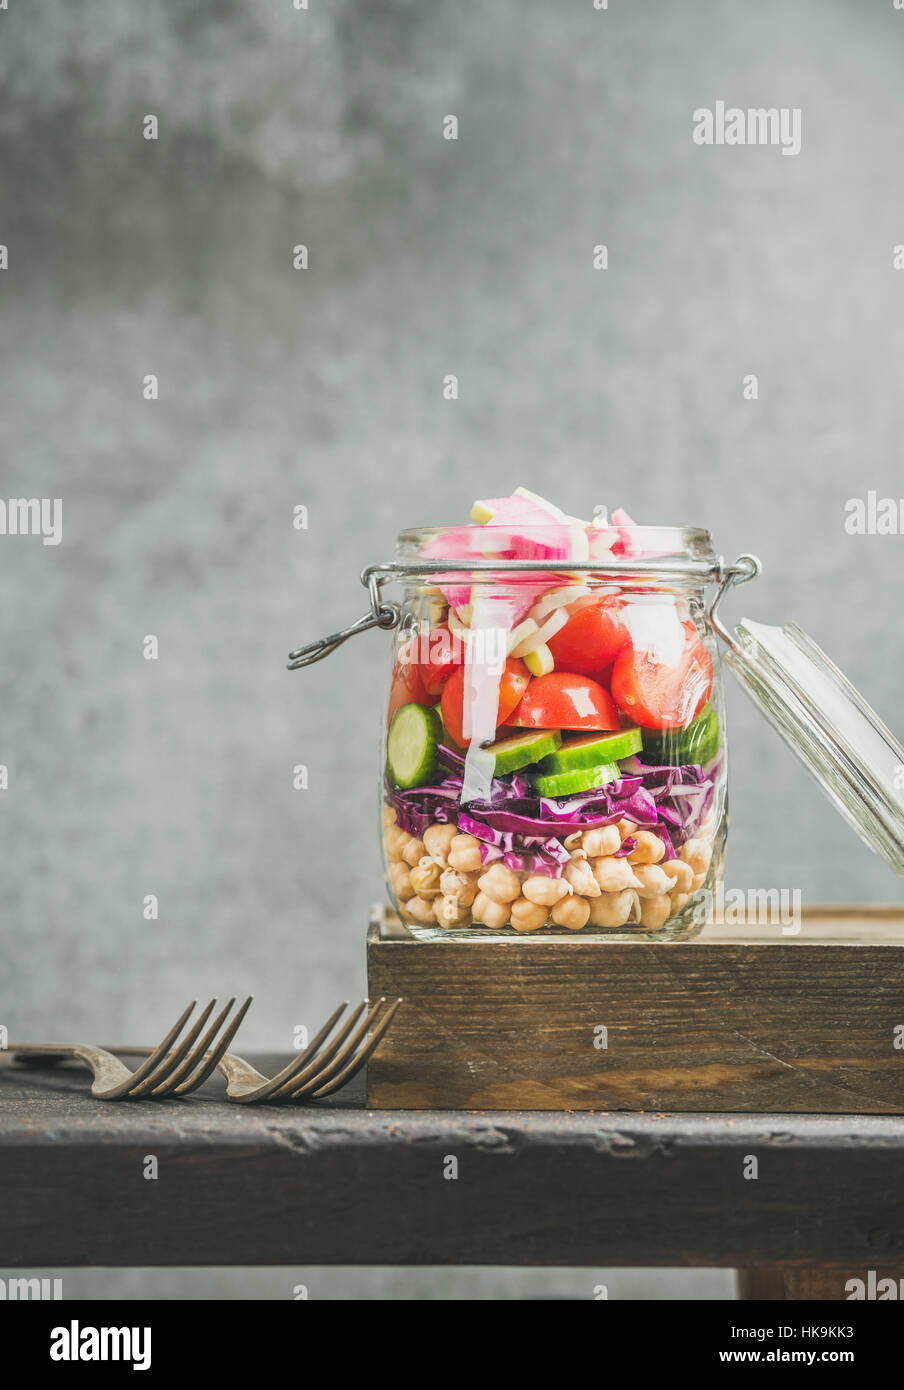 Healthy take-away lunch jar. Vegetable and chickpea sprout layered vegan salad in glass jar, grey concrete wall background, copy space, selective focu Stock Photo